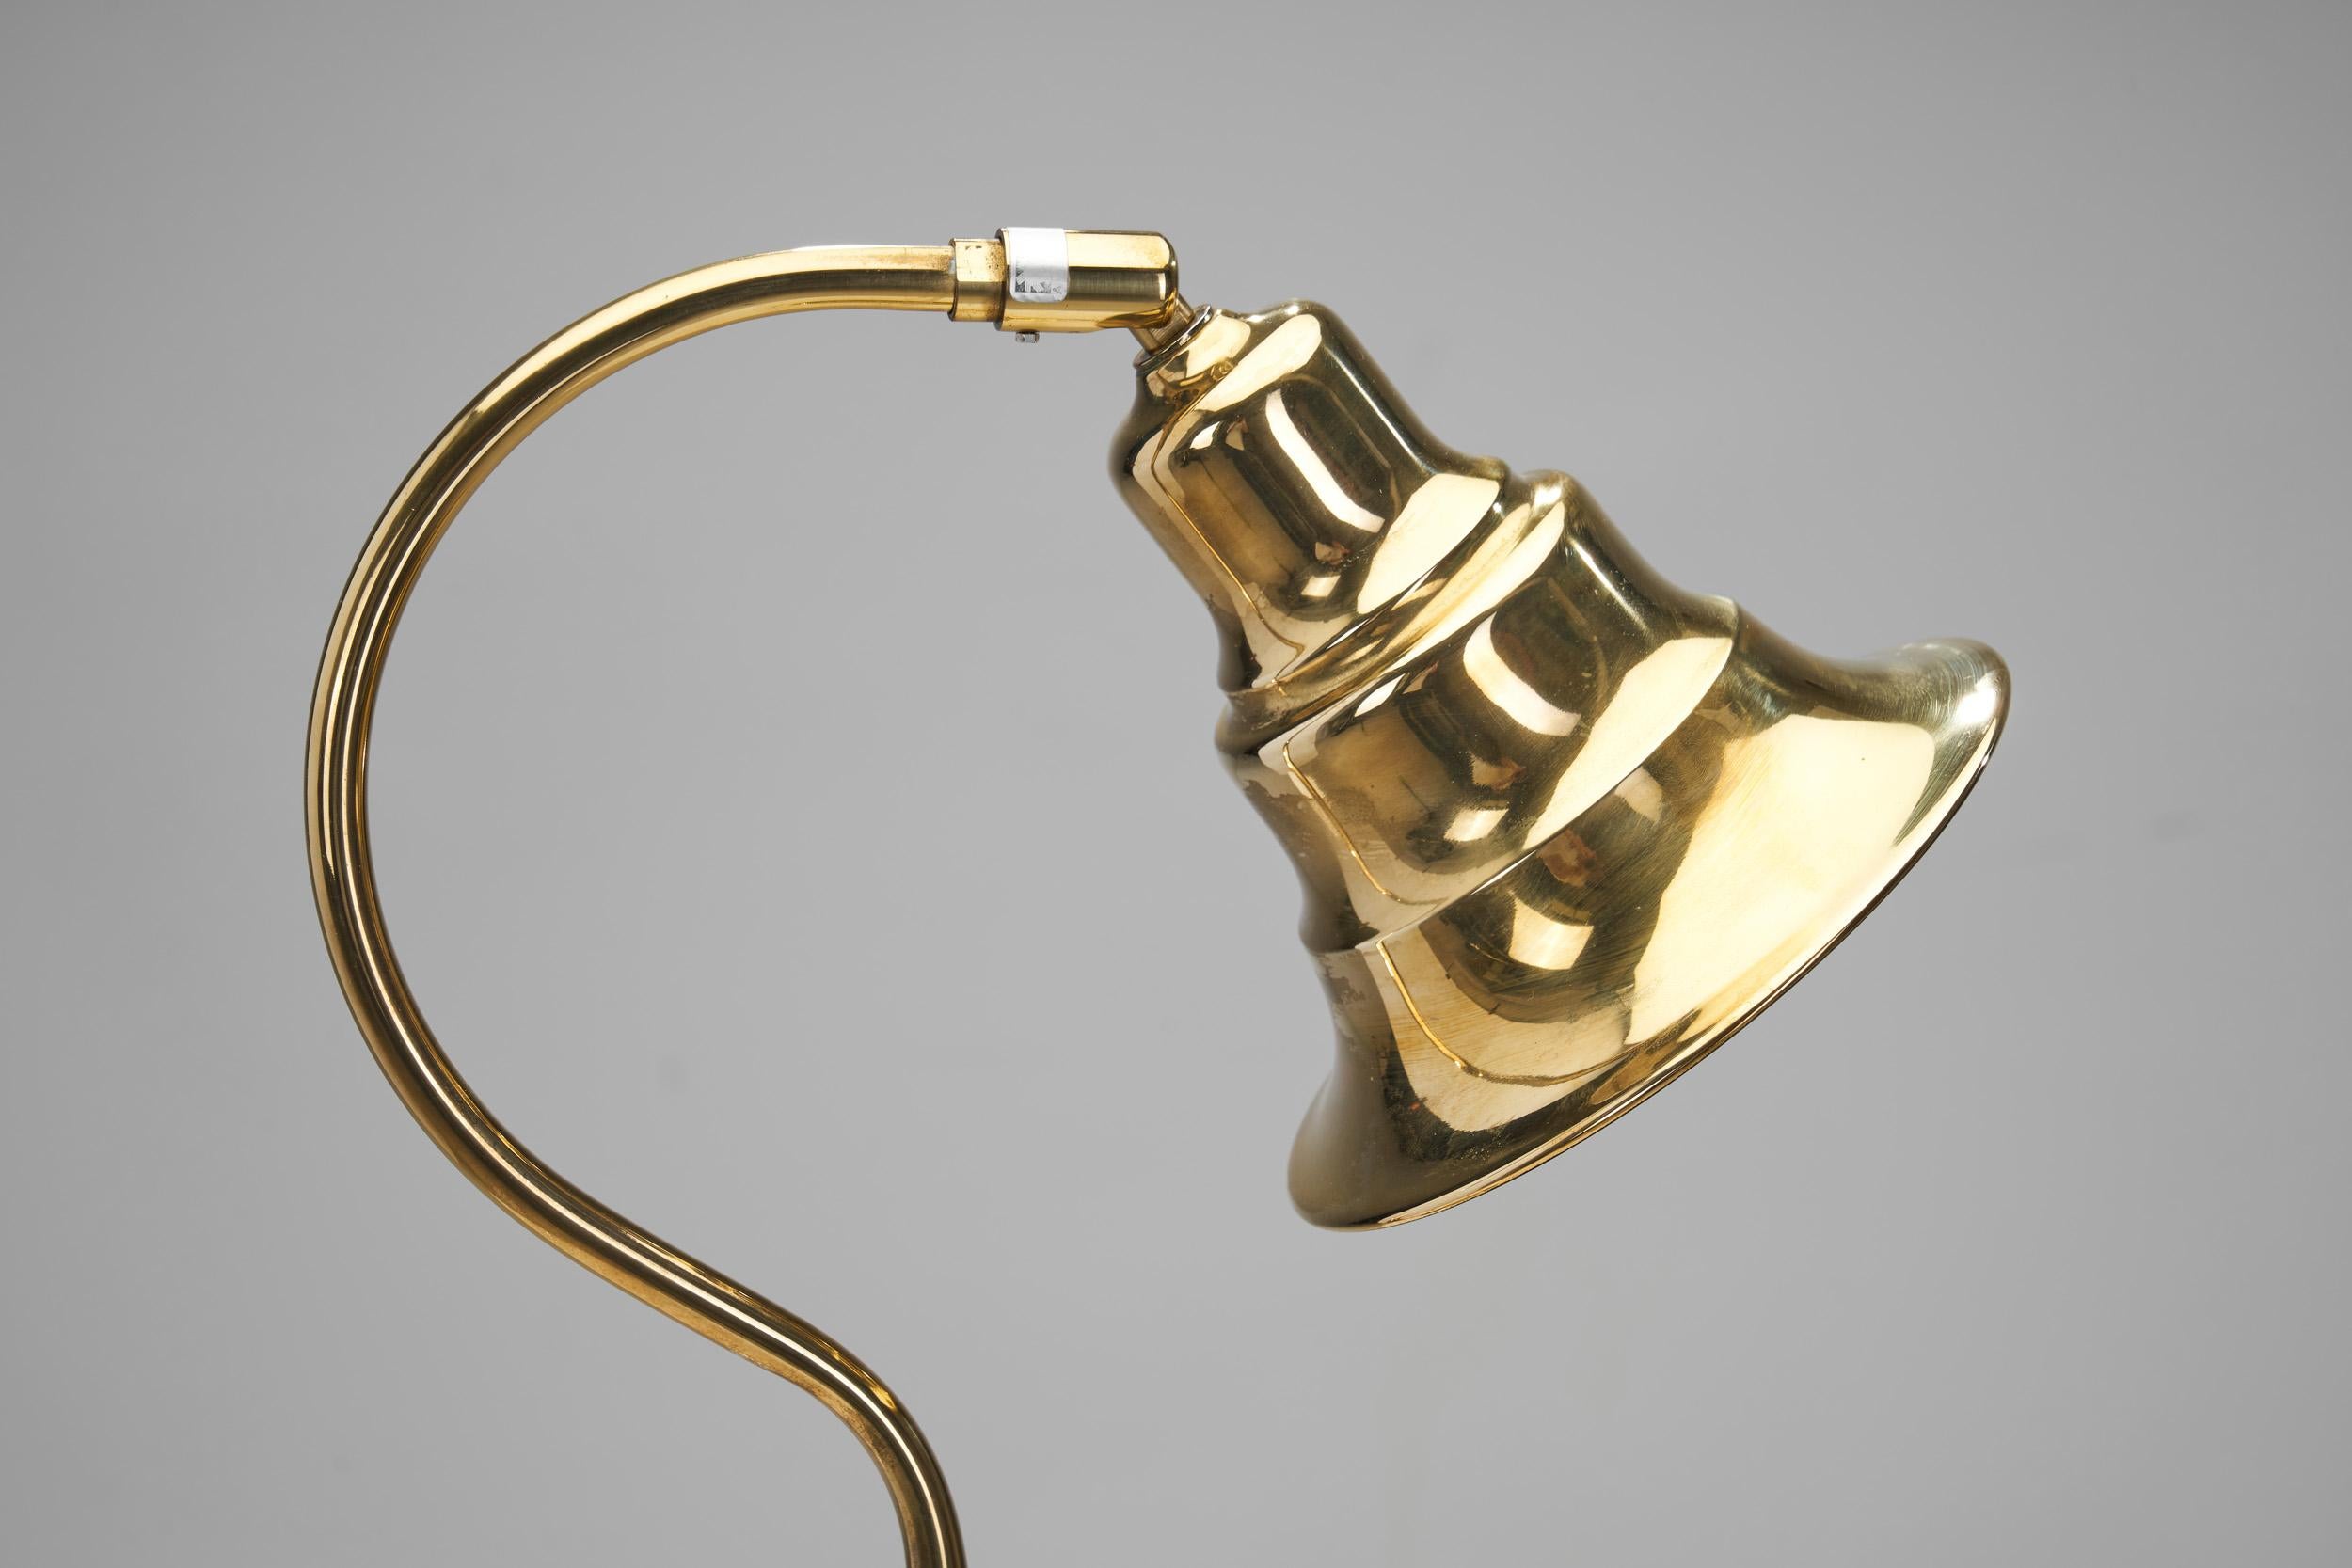 Jan Wickelgren Curved Brass Table Lamp for Aneta Belysning AB, Sweden, 1970s For Sale 3